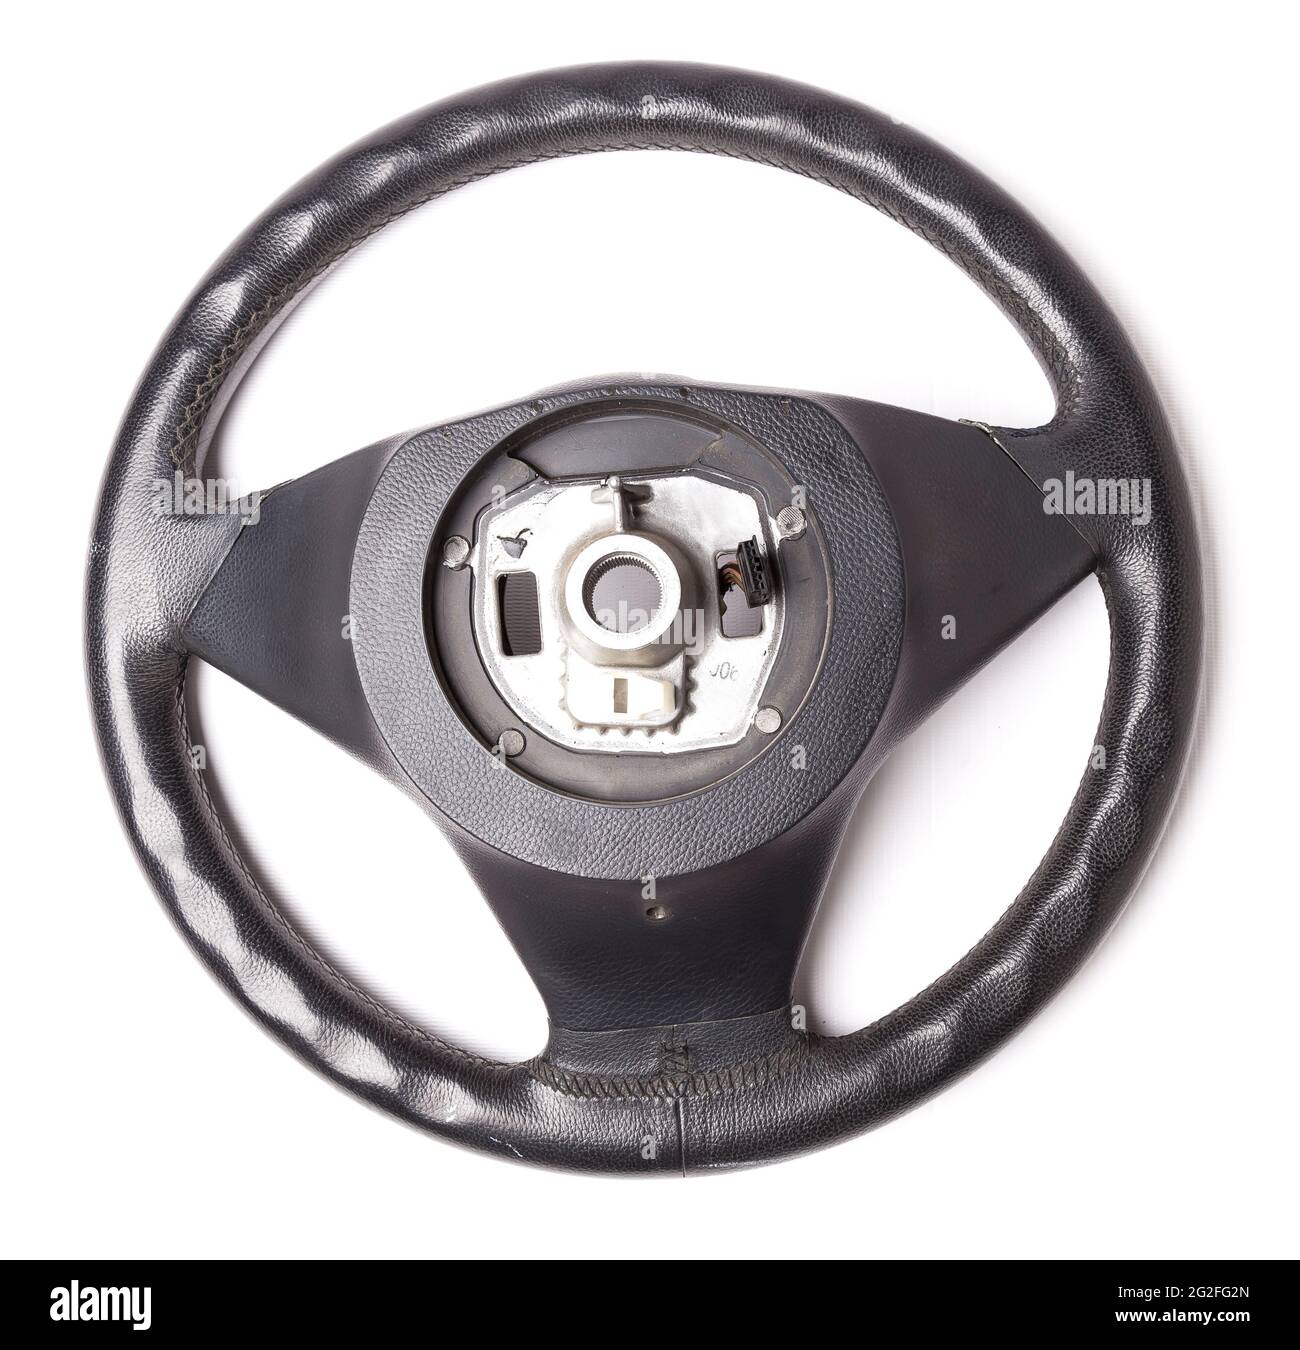 Steering Wheel Cut Out High Resolution Stock Photography and Images - Alamy